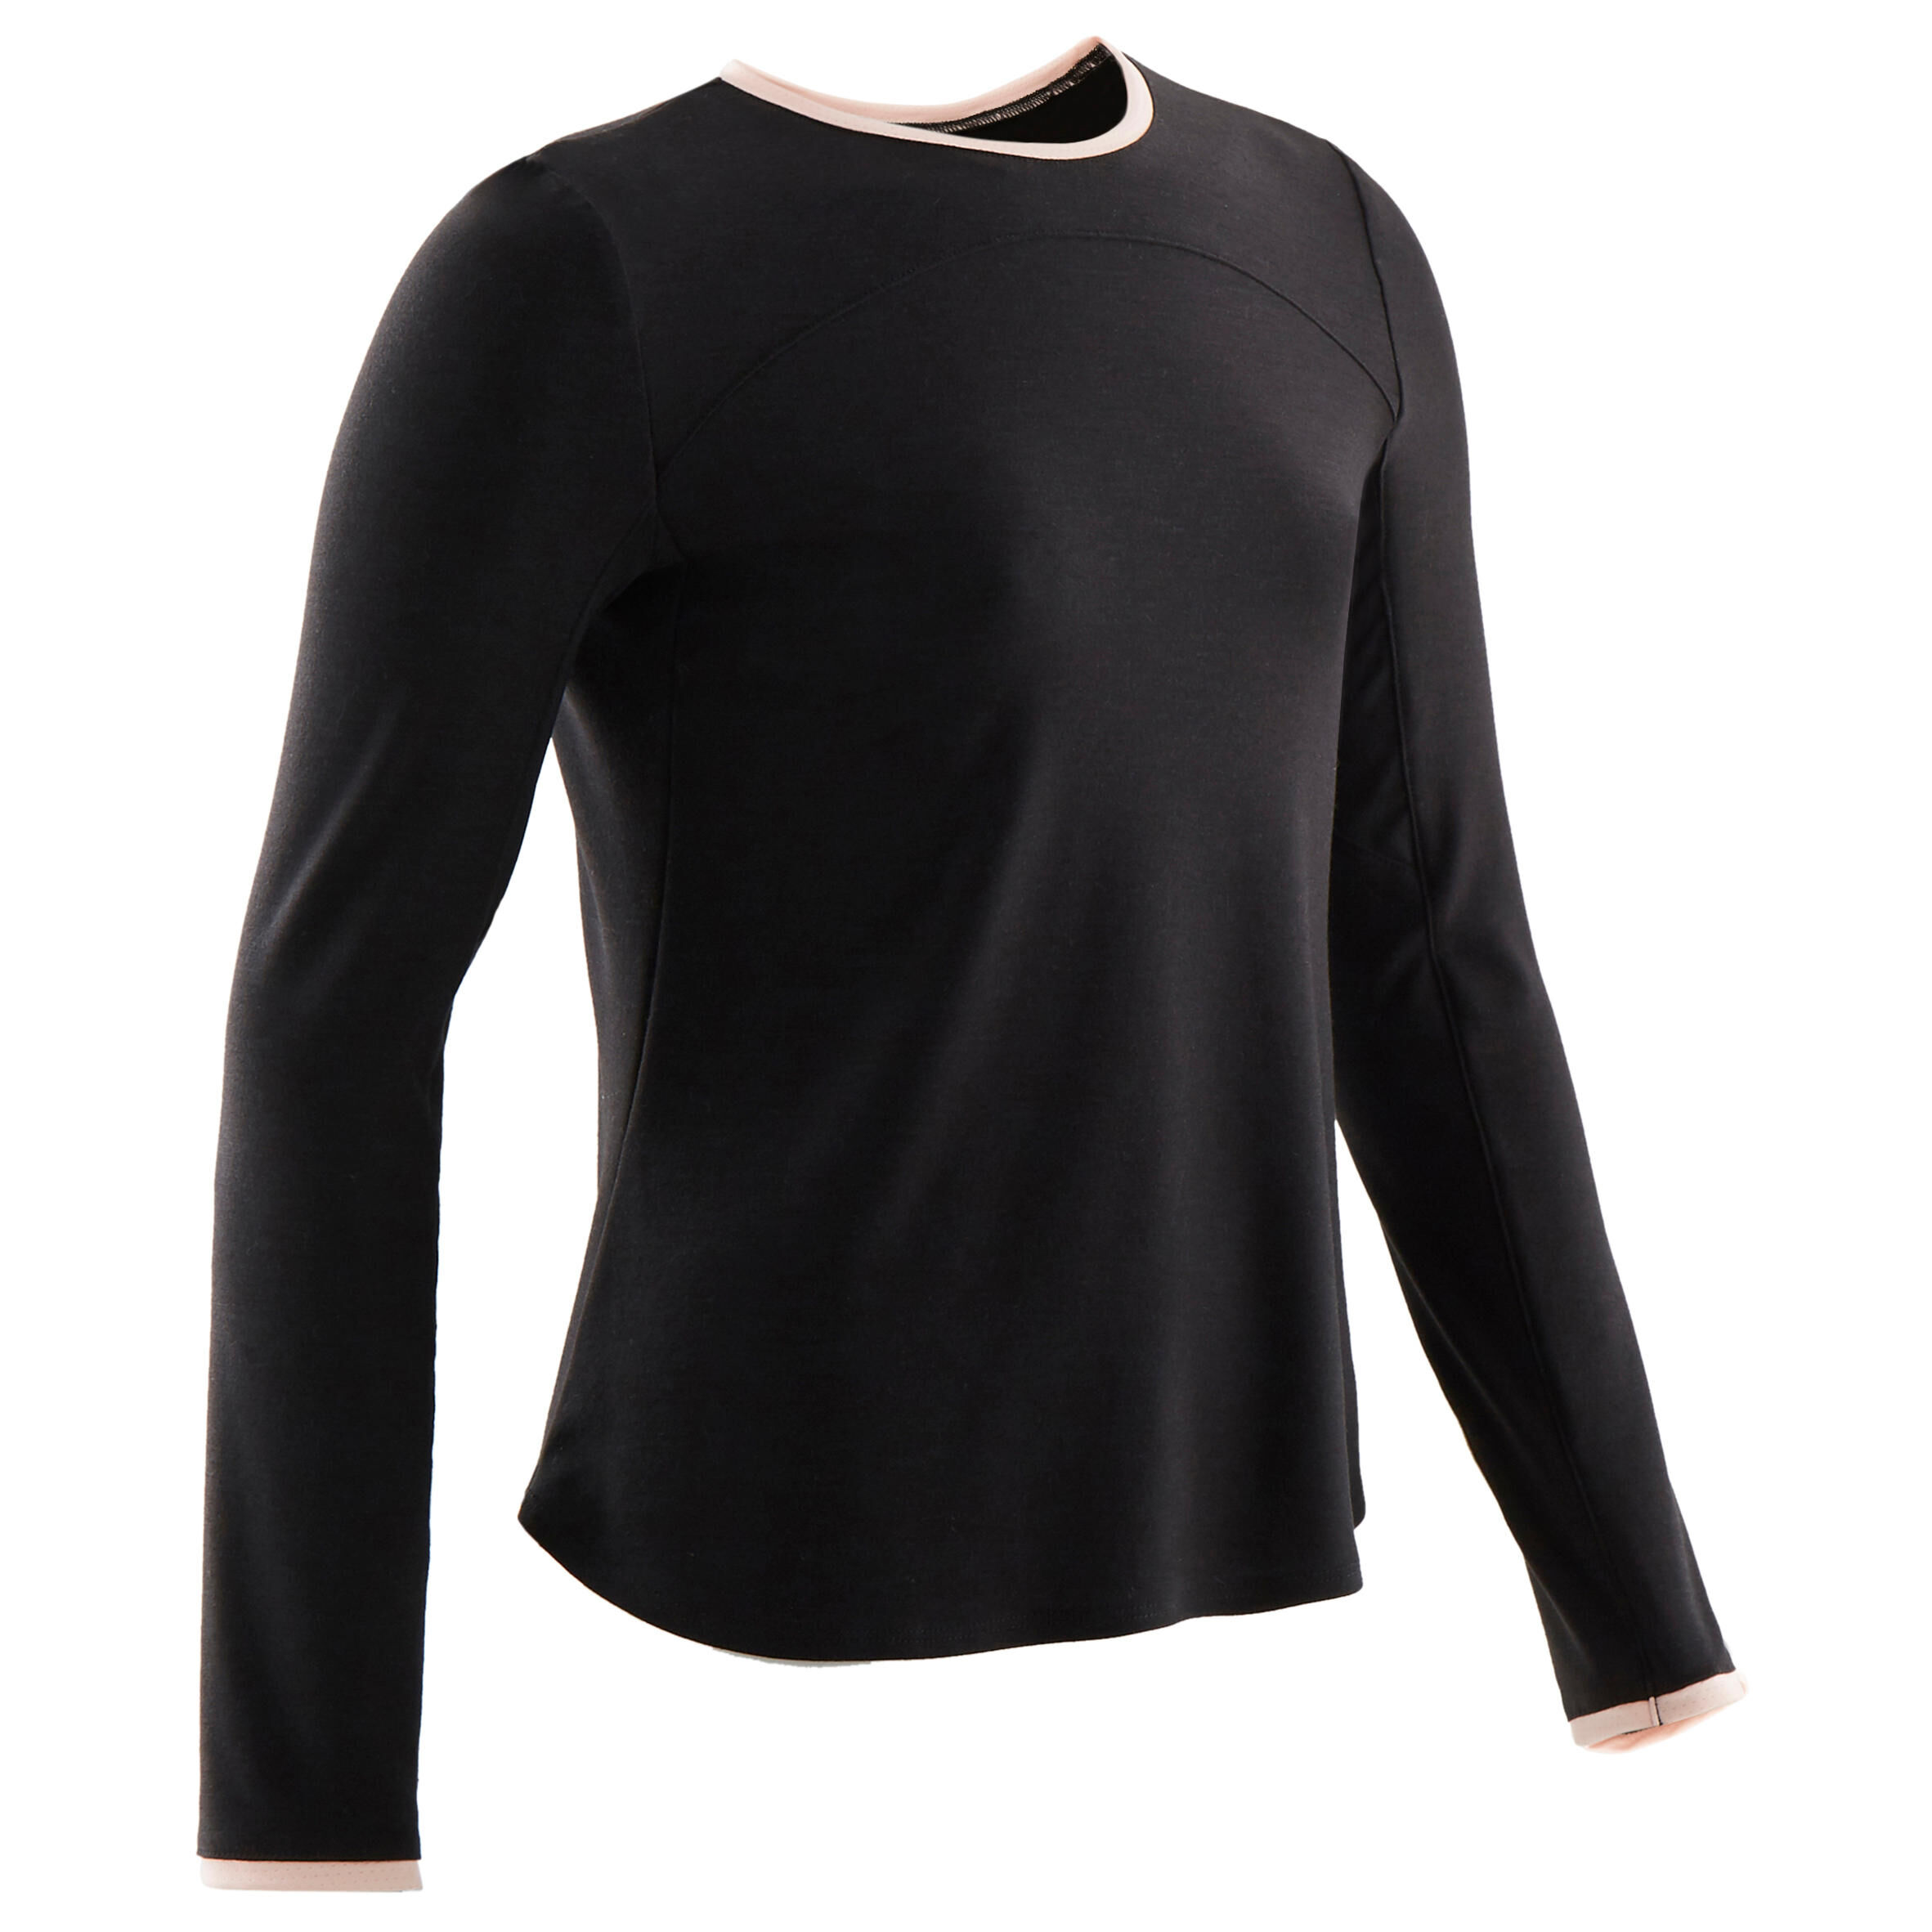 DOMYOS Kids' Long-Sleeved Breathable Cotton Gym T-Shirt 500 - Black/Pink